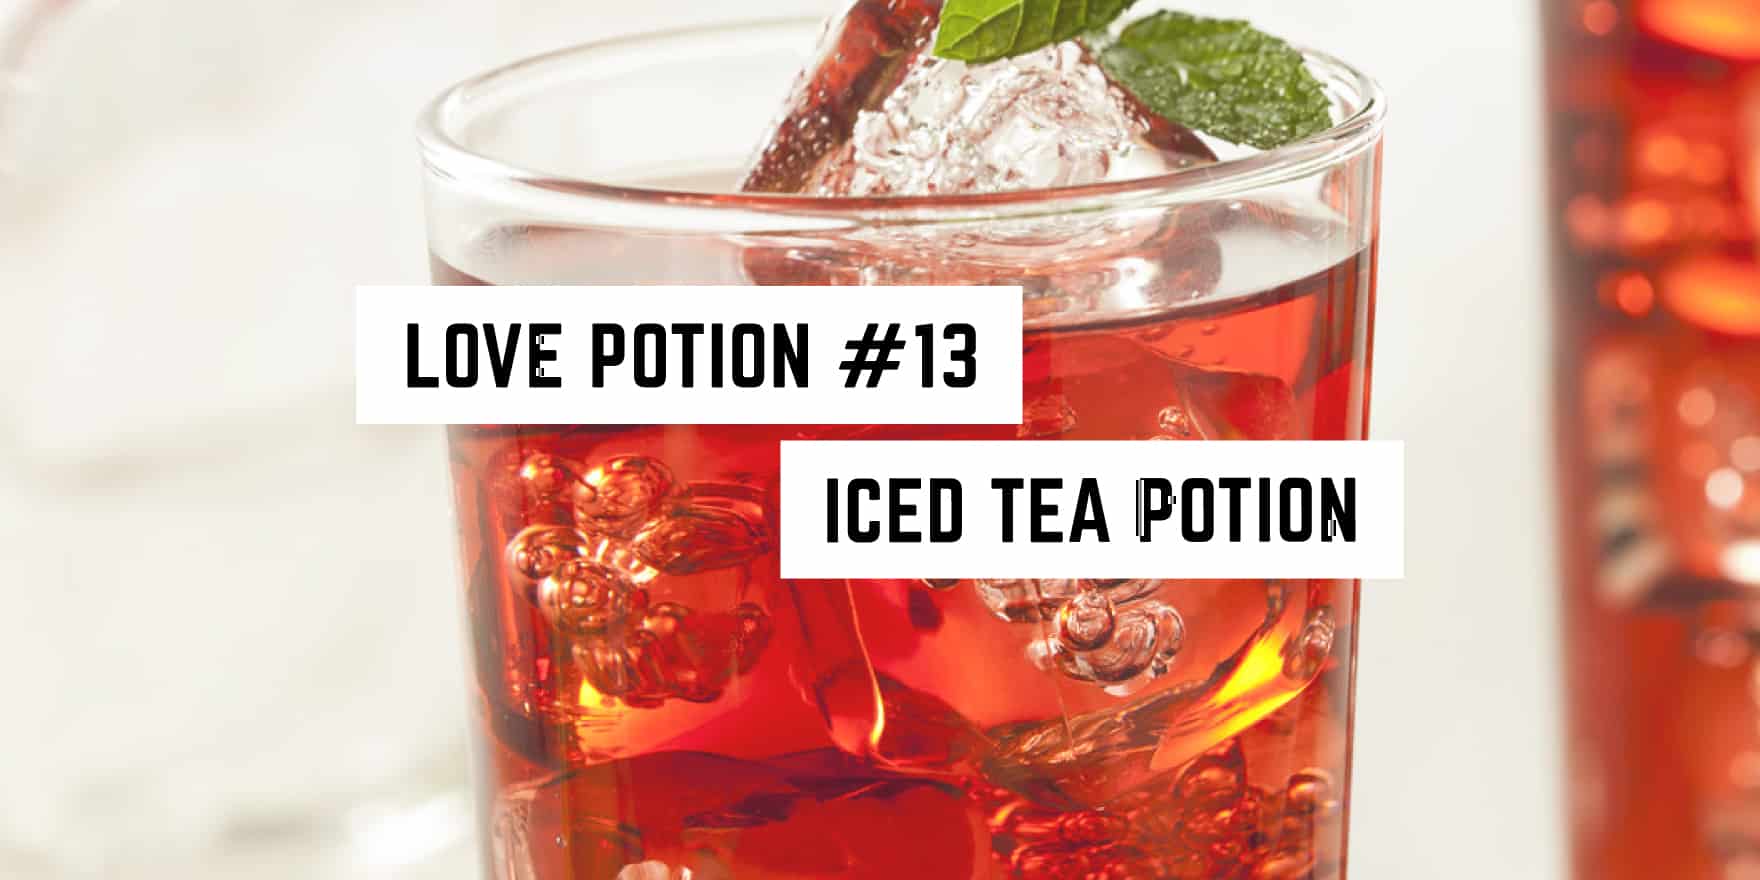 A refreshing glass of iced tea humorously labeled as "love potion #9" - a whimsical, witchy twist on a classic beverage.